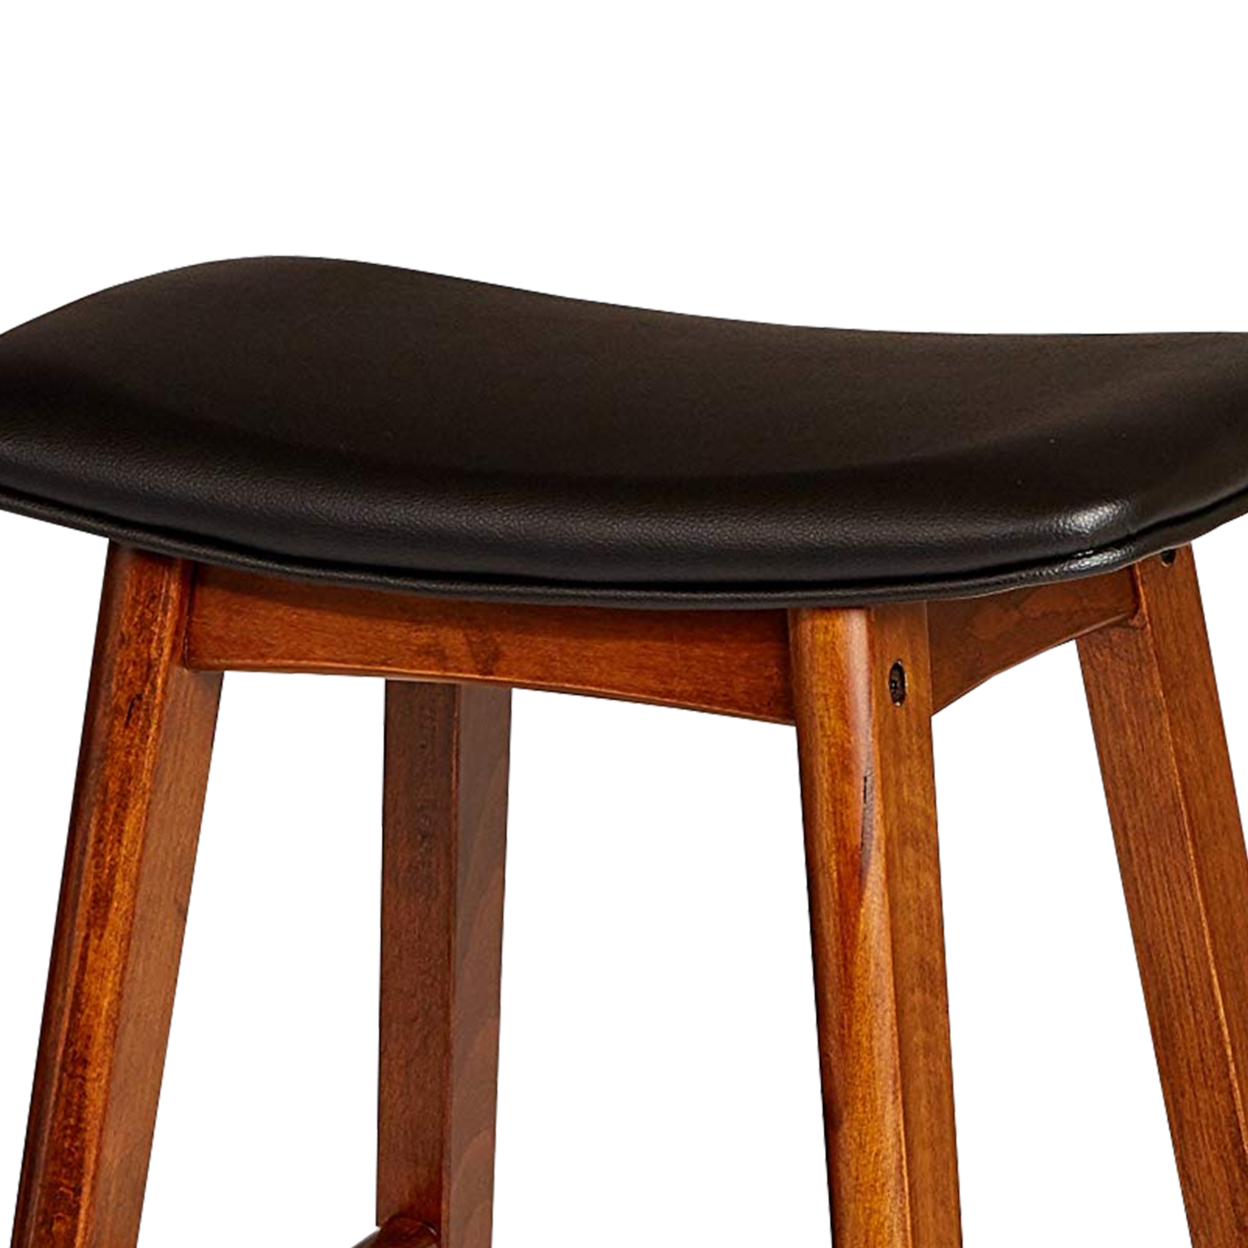 Wooden Counter Height Stool In Black And Brown, Set Of 2- Saltoro Sherpi